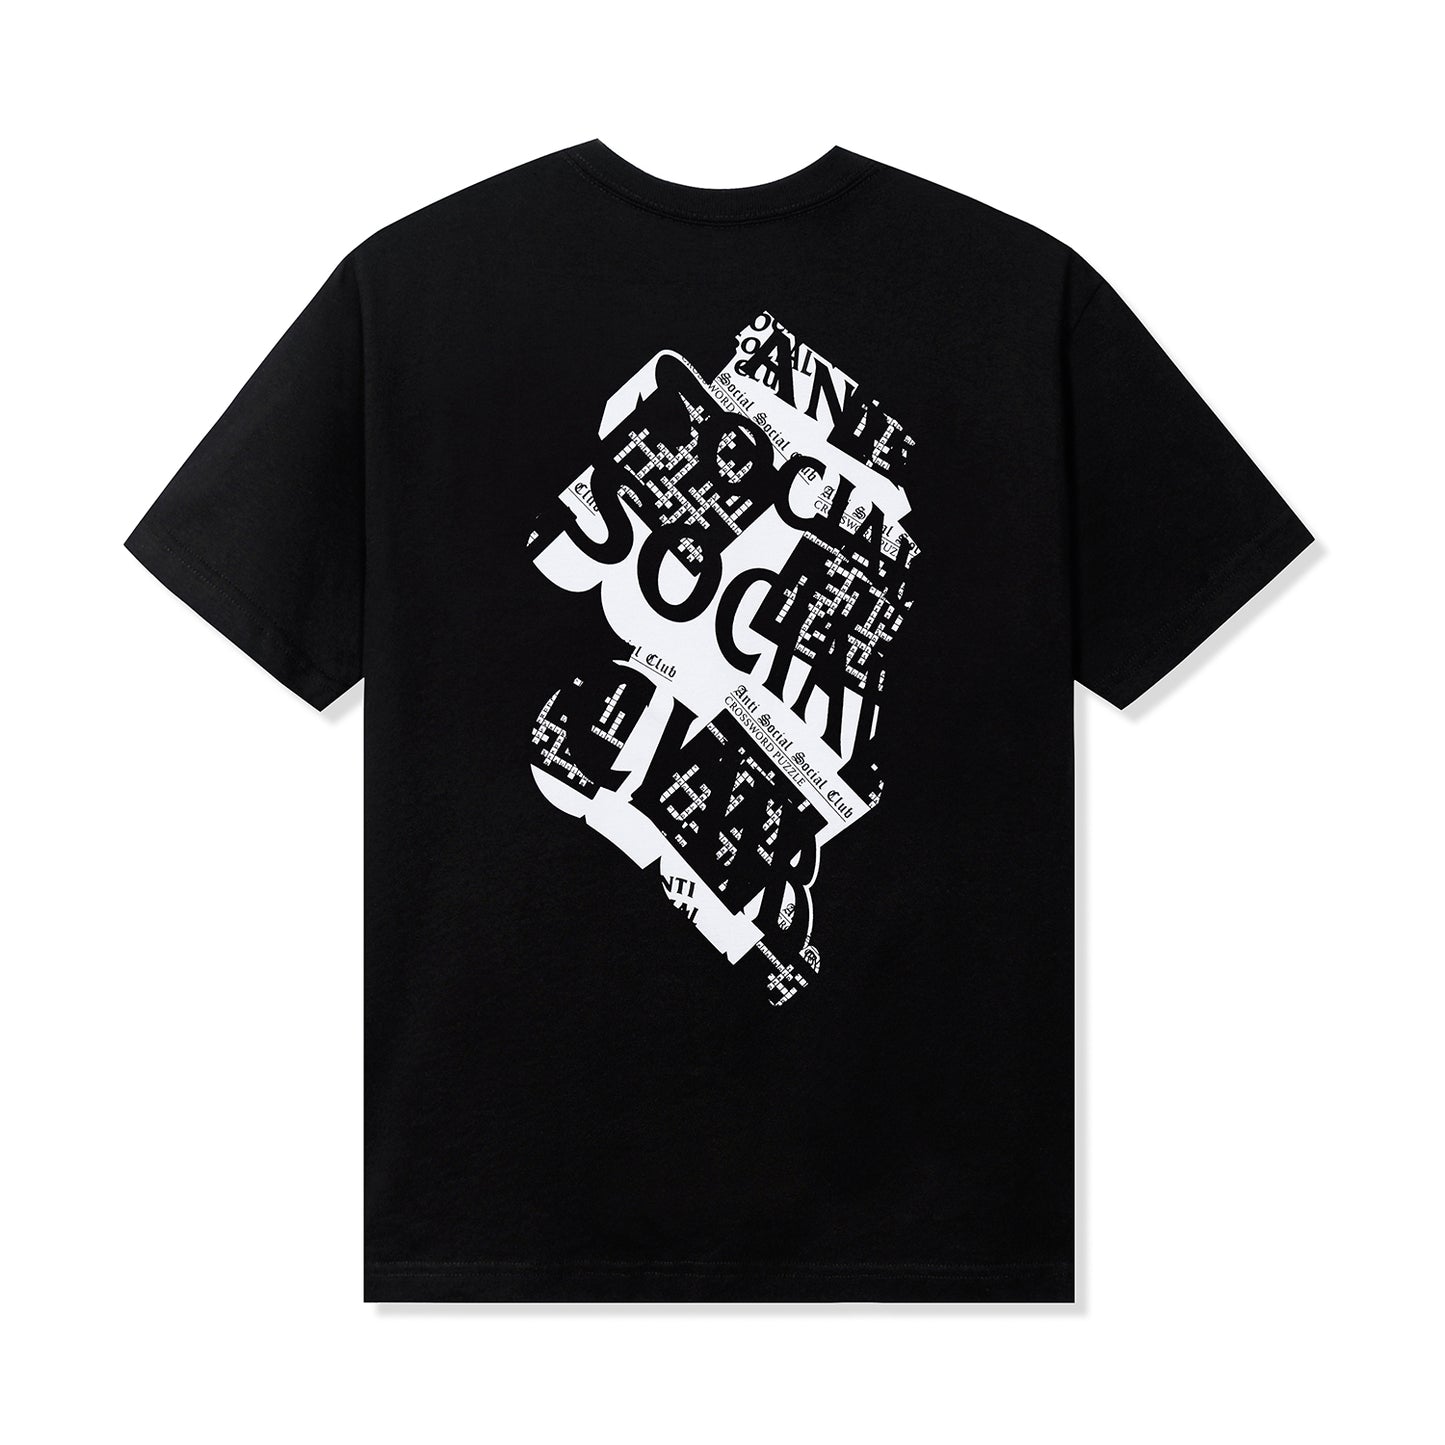 Guess What? Tee - Black